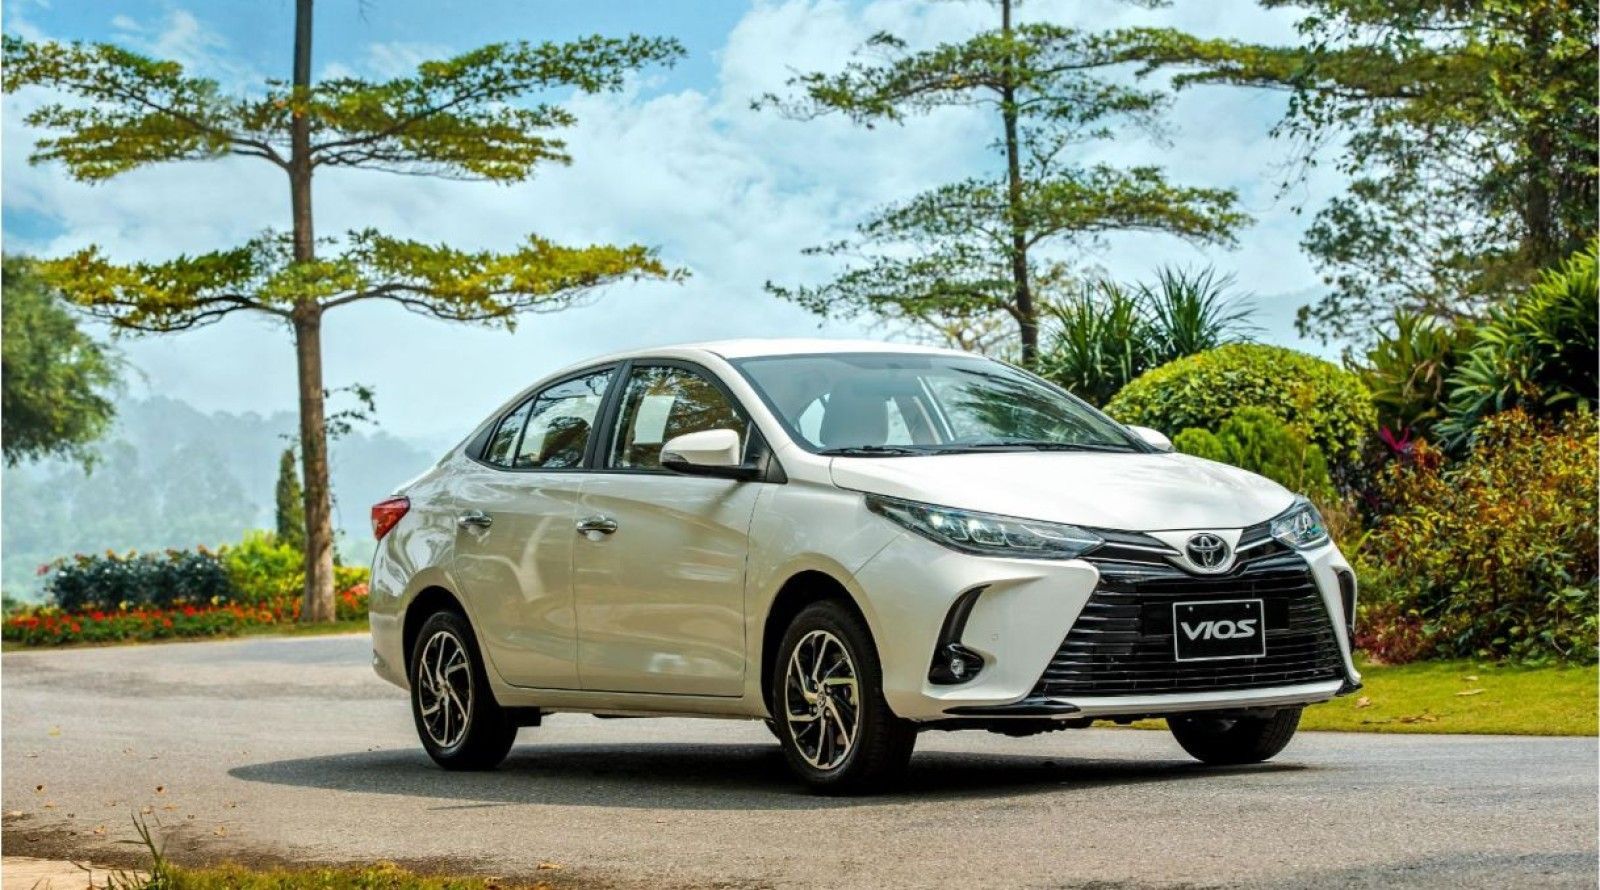 the Vios is the ideal companion for exploring the scenic roads and stunning landscapes.